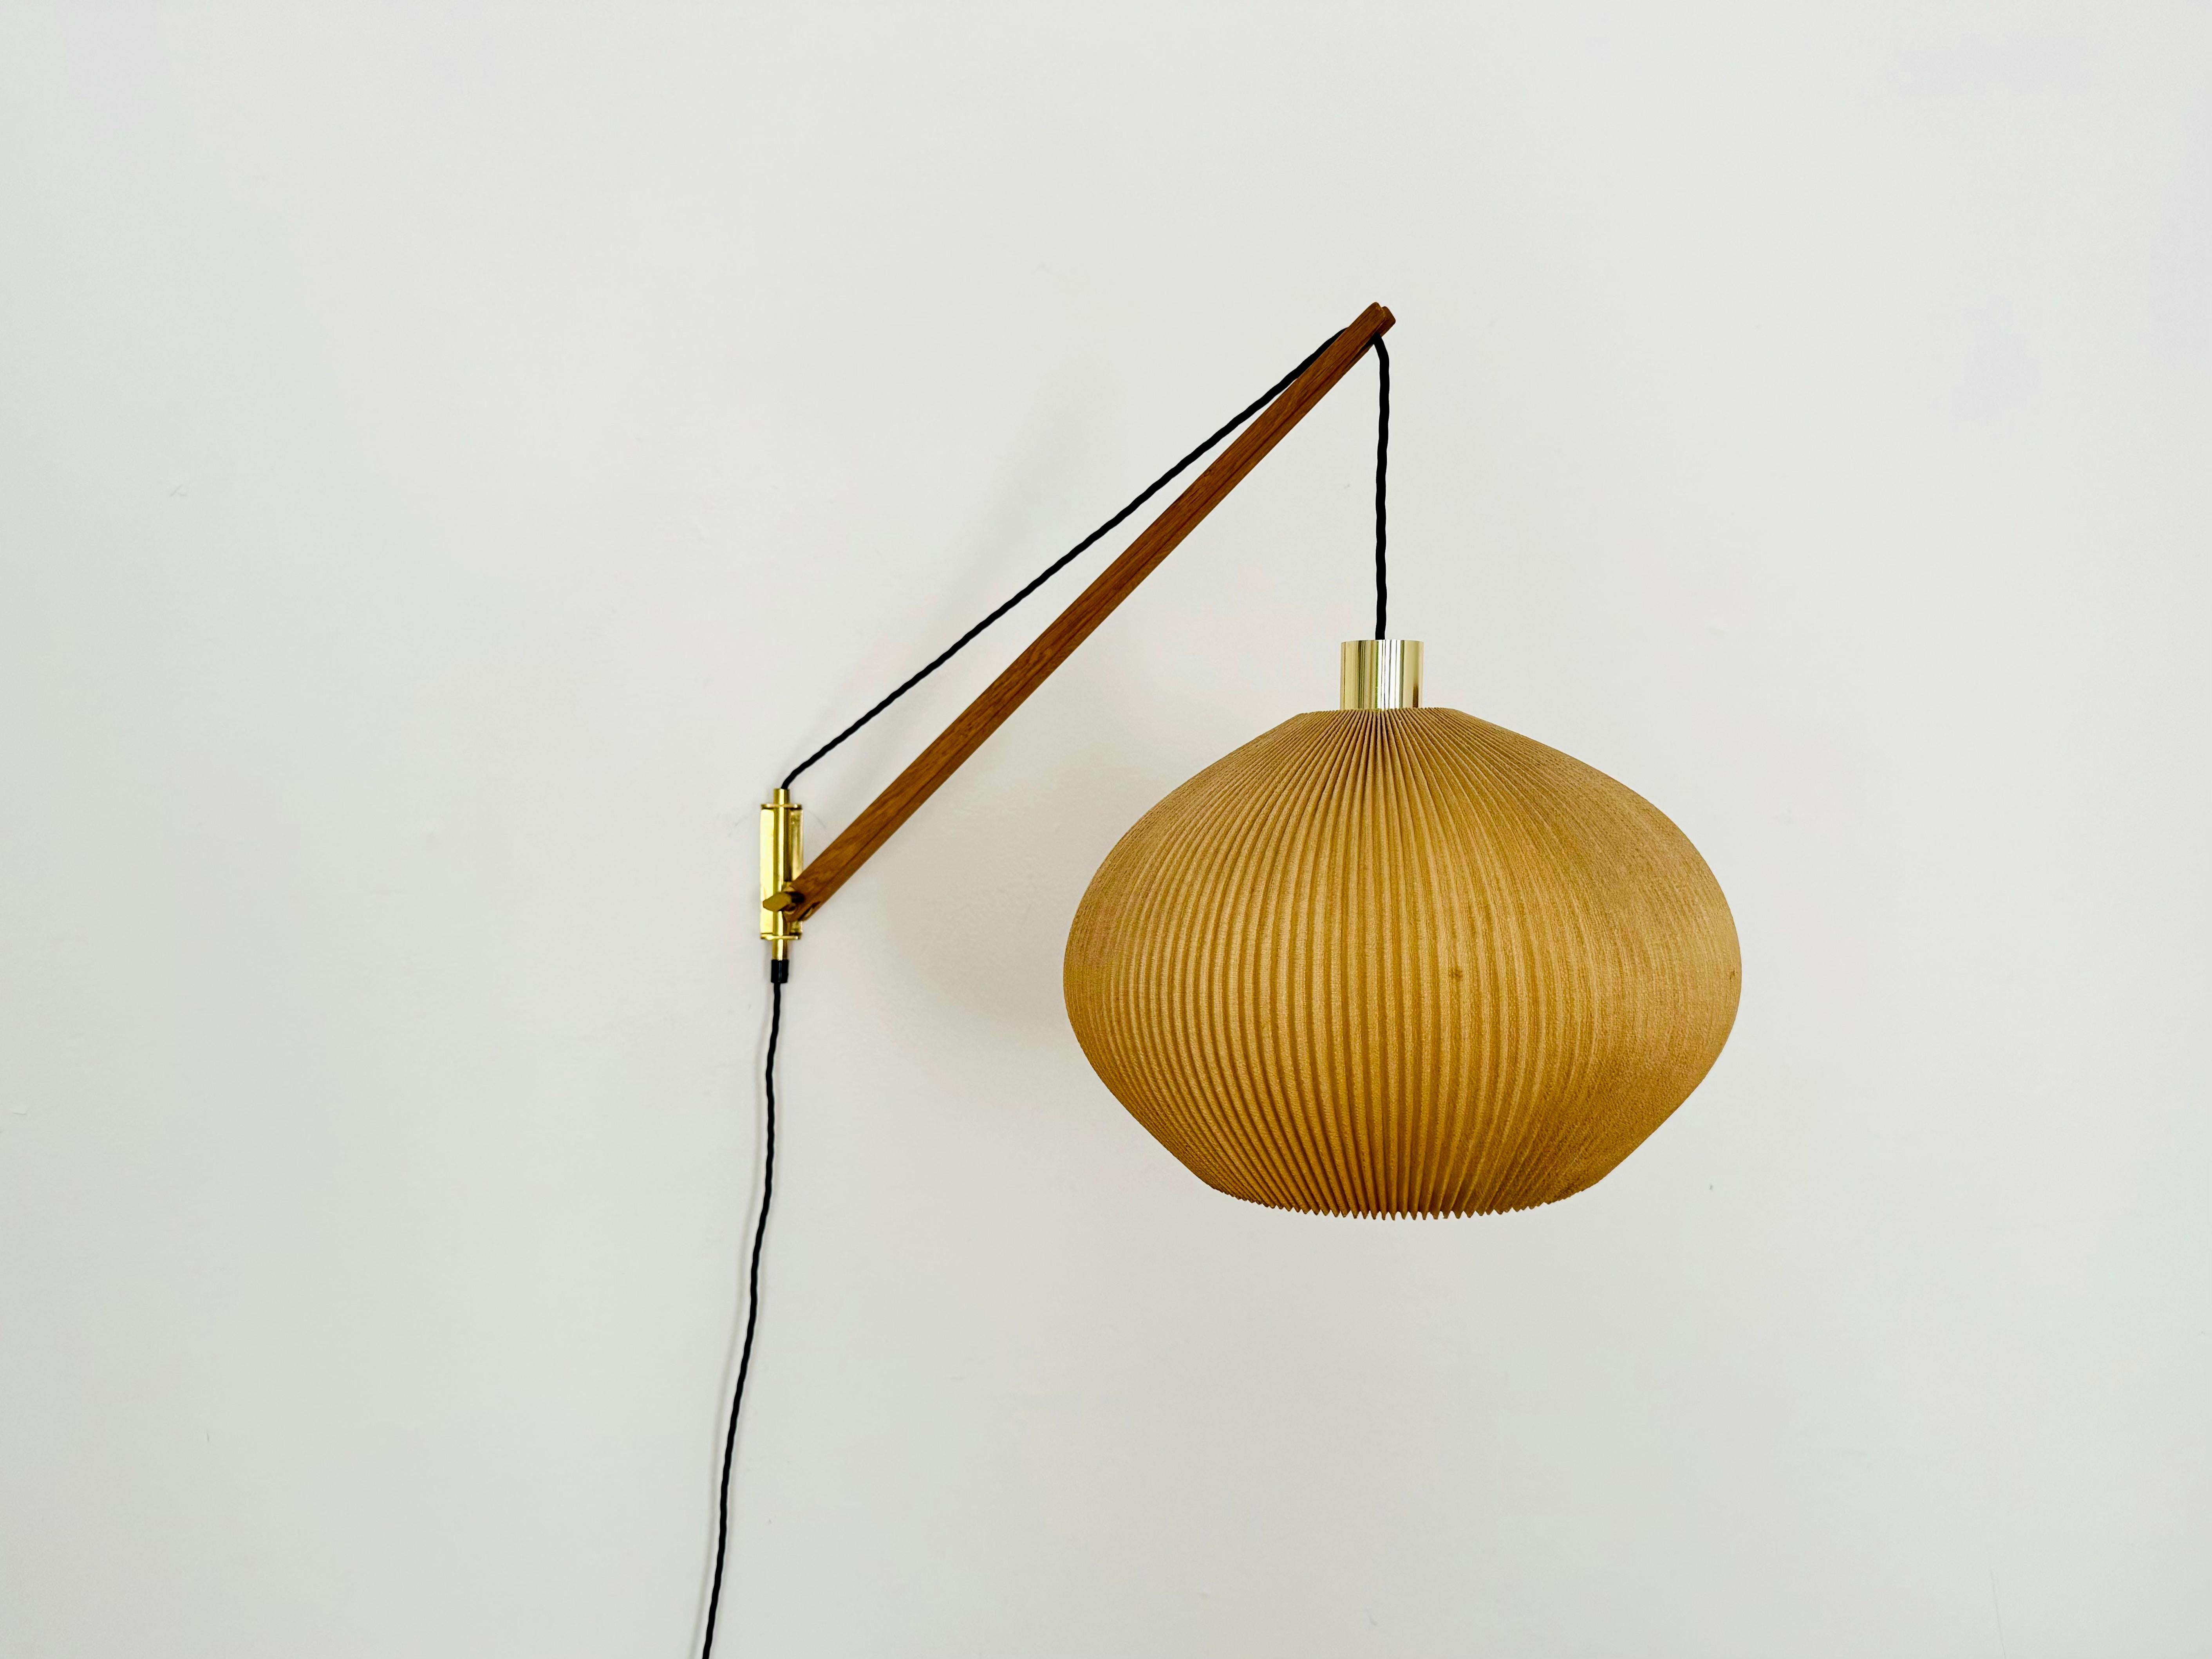 Wonderful pleated wall lamp from the 1950s.
Great and exceptionally minimalist design with a fantastically elegant look.
Very nice swivel arm made of oak wood.
The lampshade creates a very cozy atmosphere.
The brass details are very high